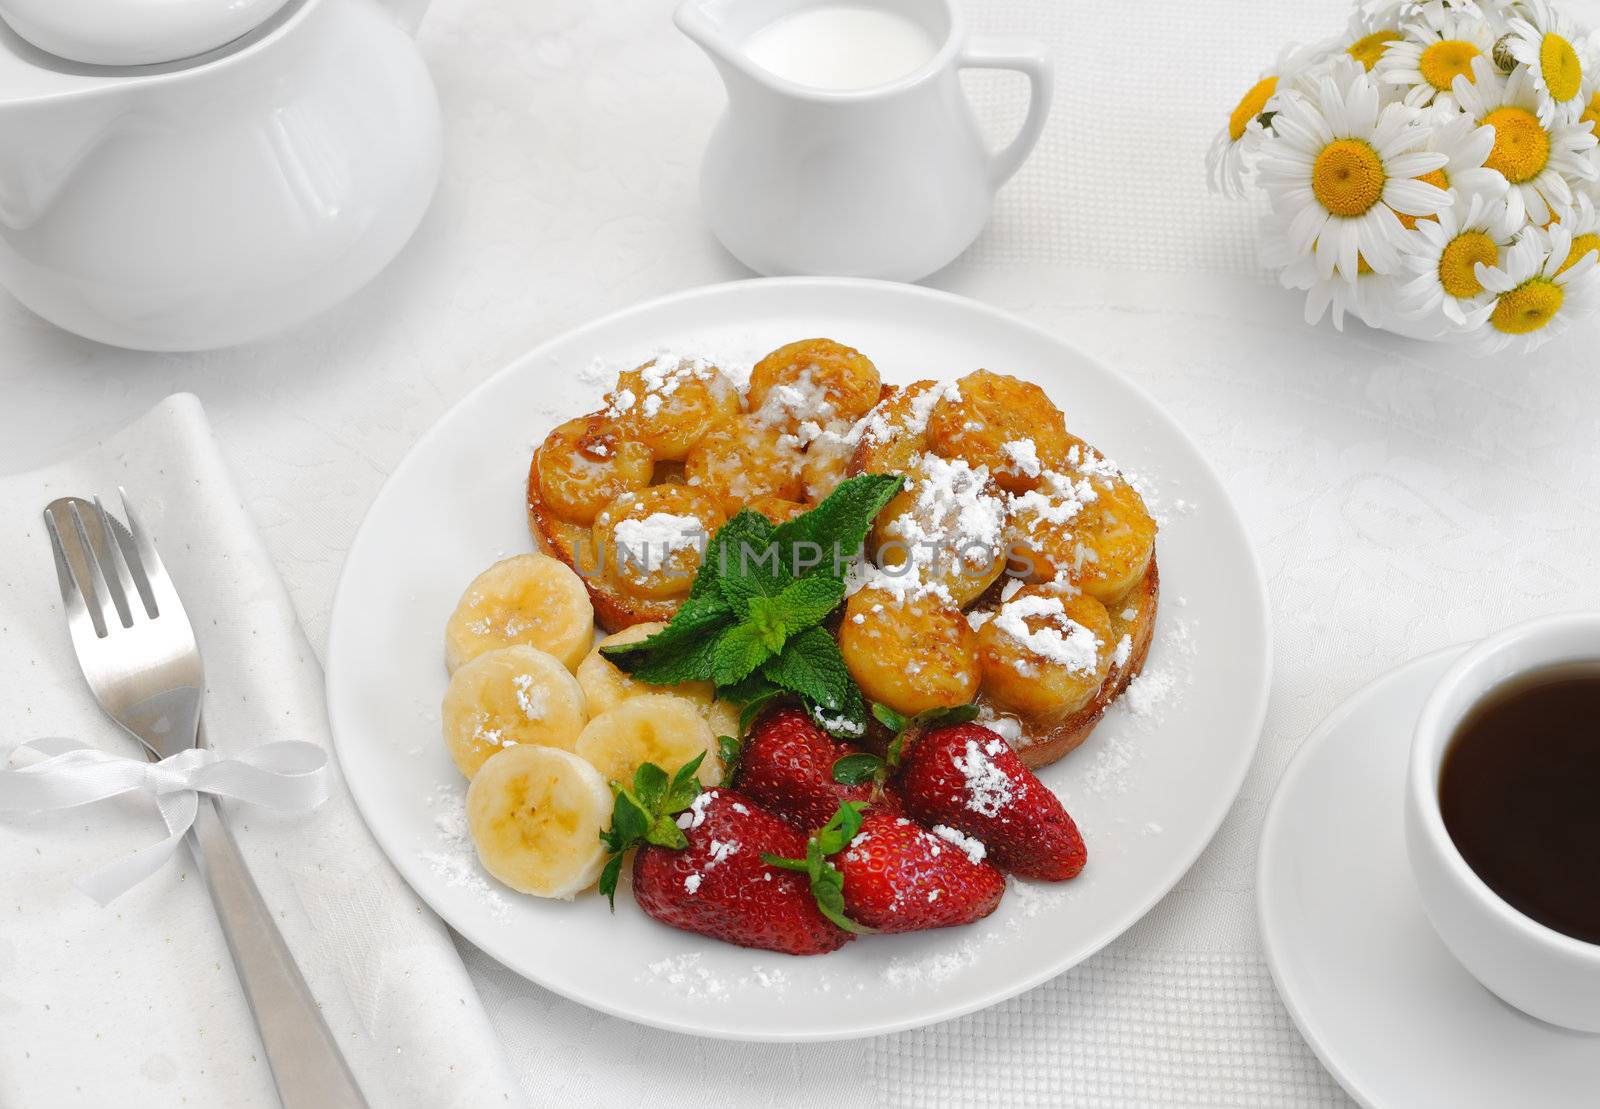 French toast with syrup and a banana with powdered sugar by Apolonia